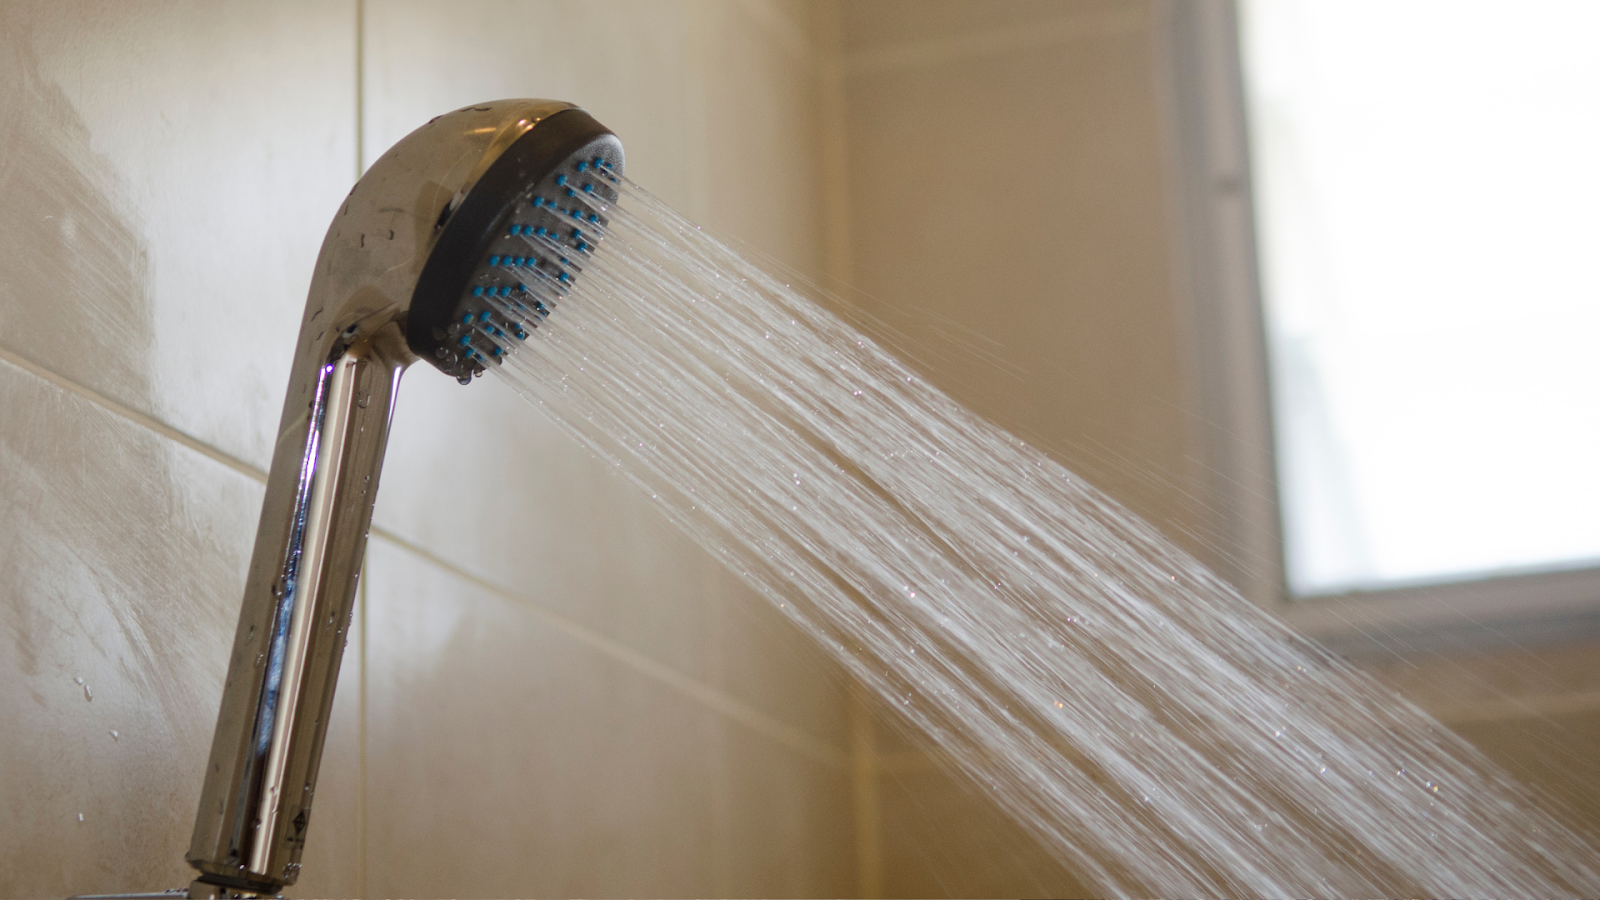 hot showers myth cleaning debunked